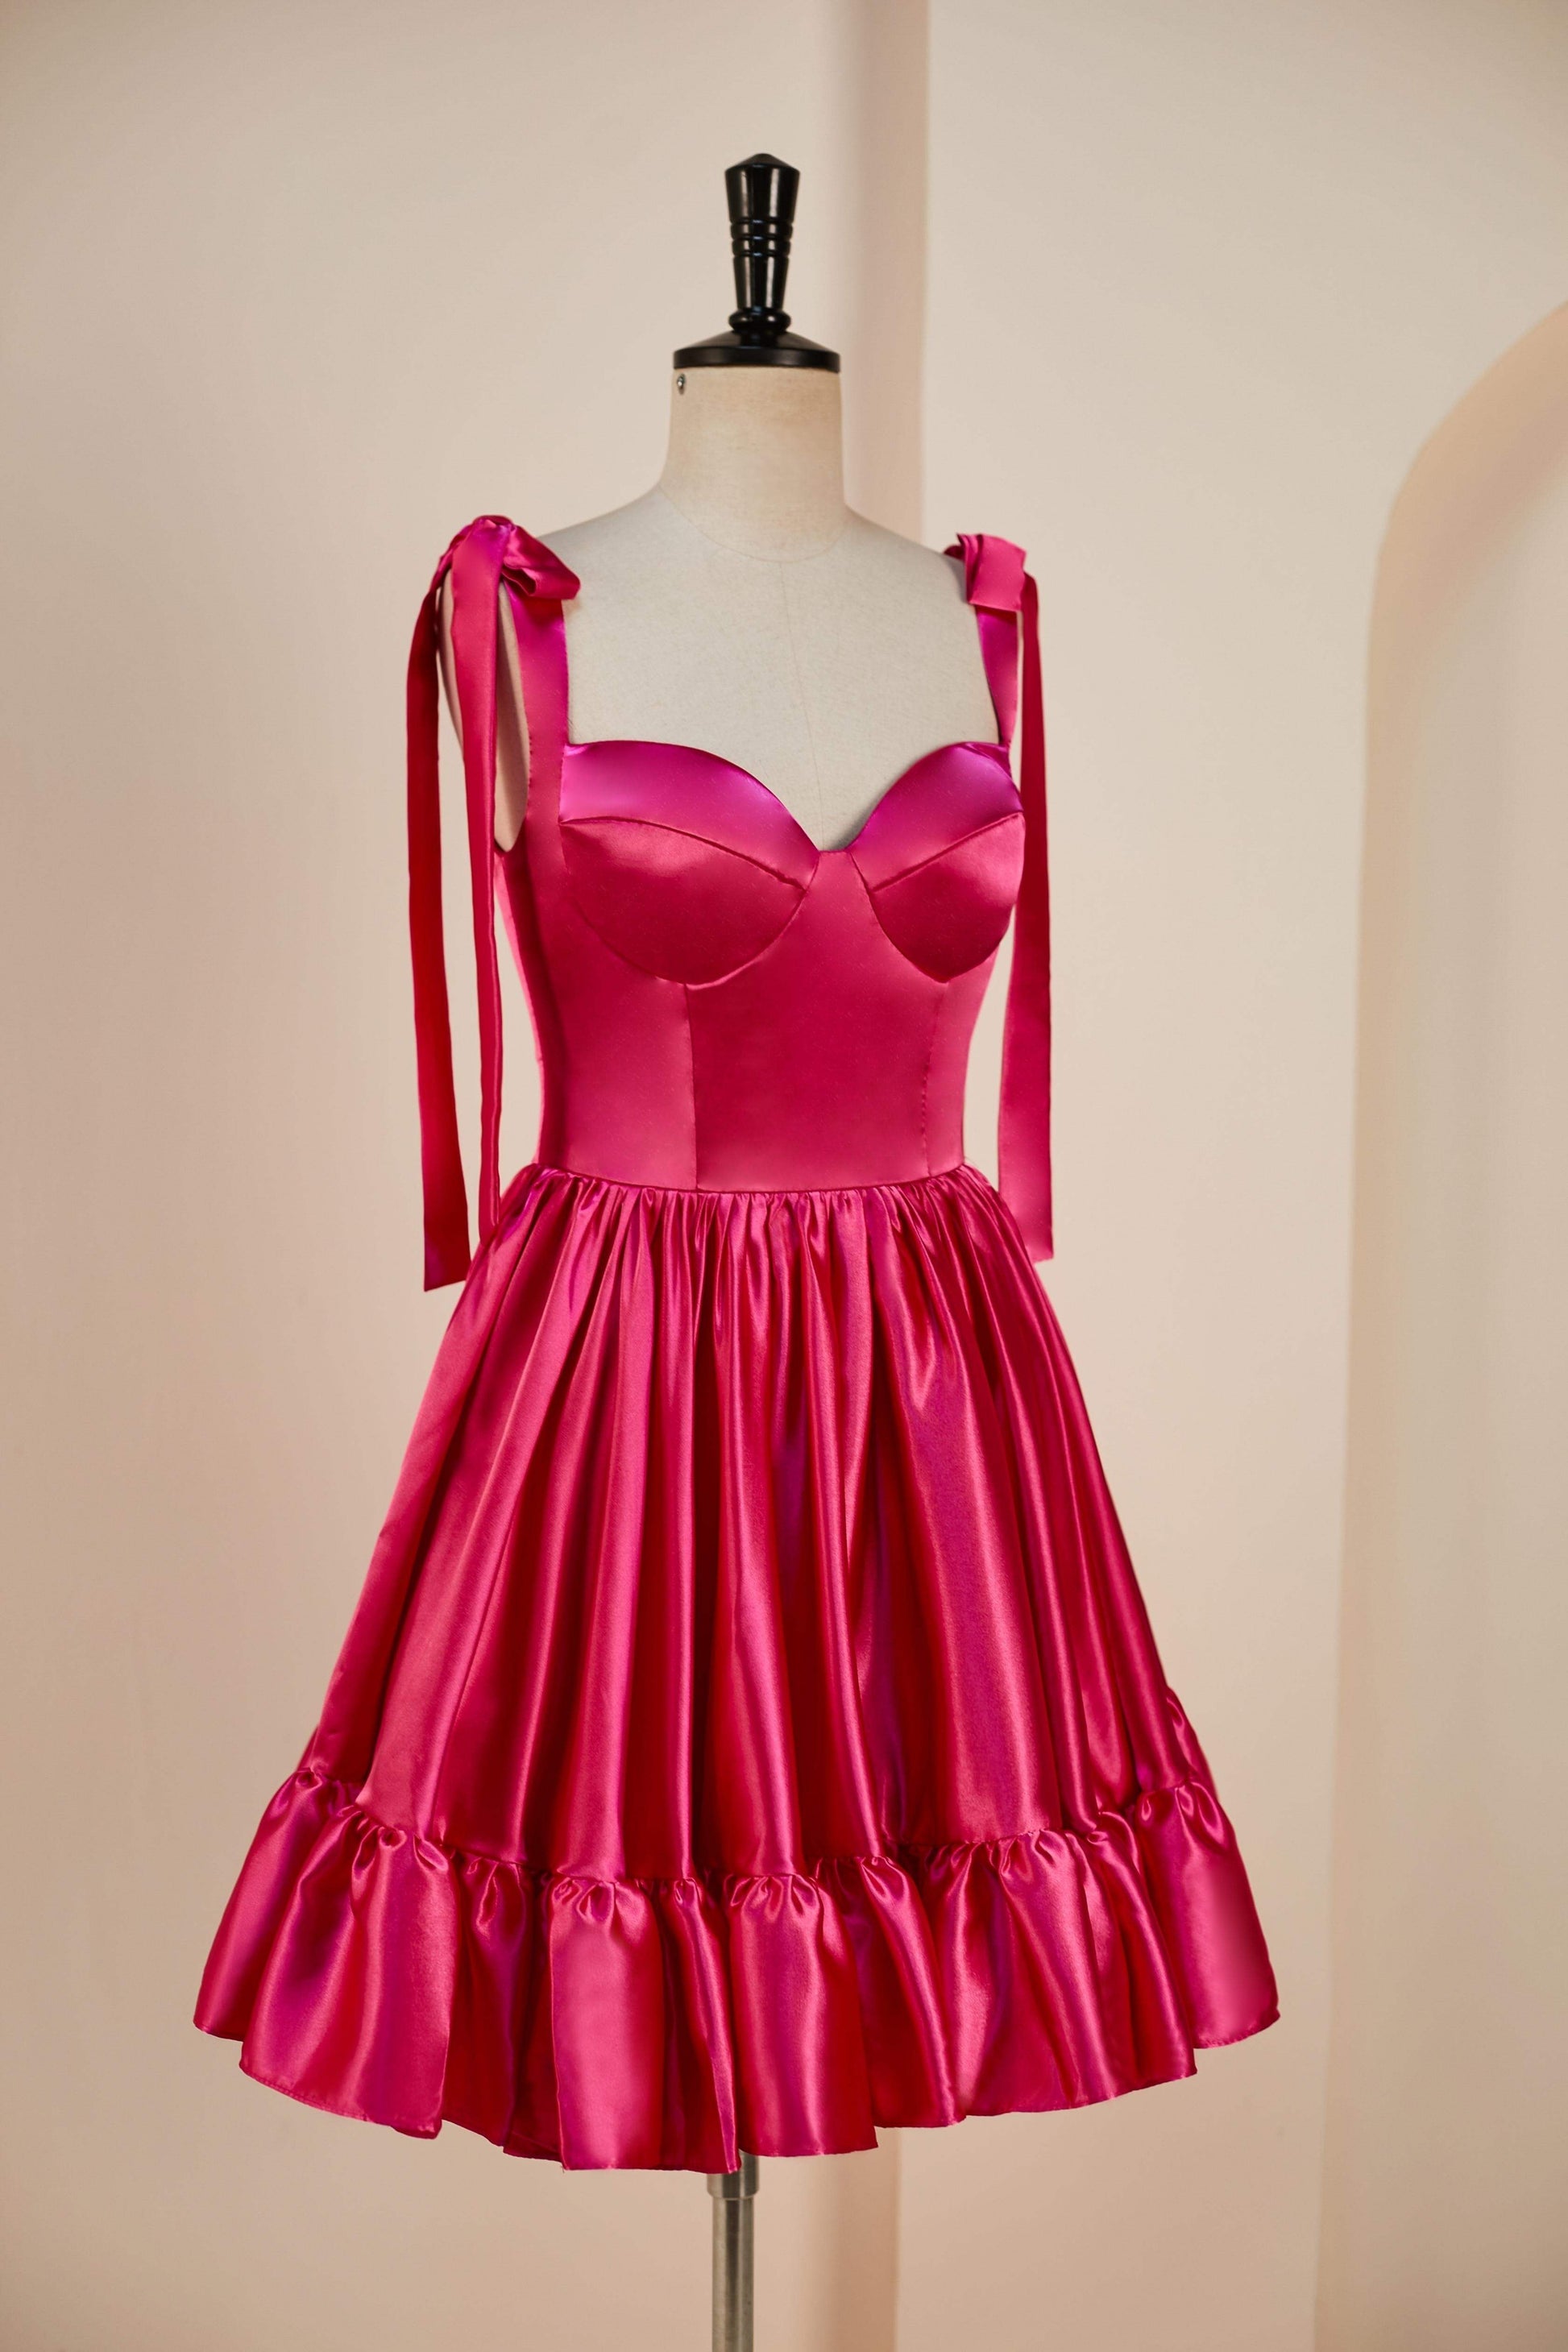 Rose Pink A-line Bow Tie Straps Ruffled Satin Homecoming Dress